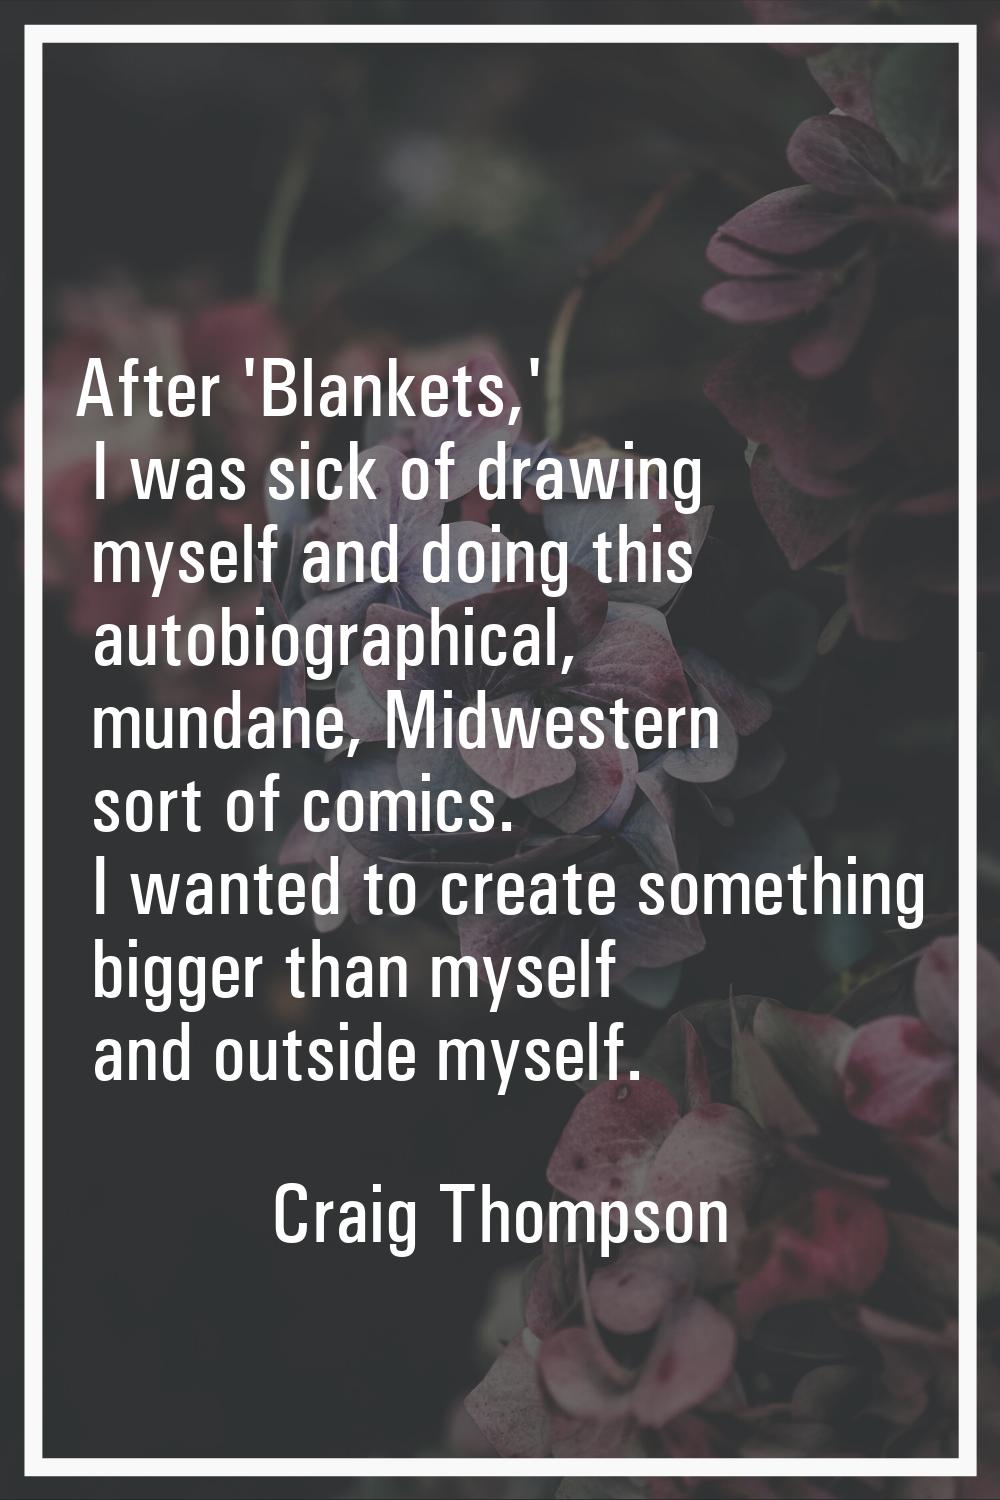 After 'Blankets,' I was sick of drawing myself and doing this autobiographical, mundane, Midwestern